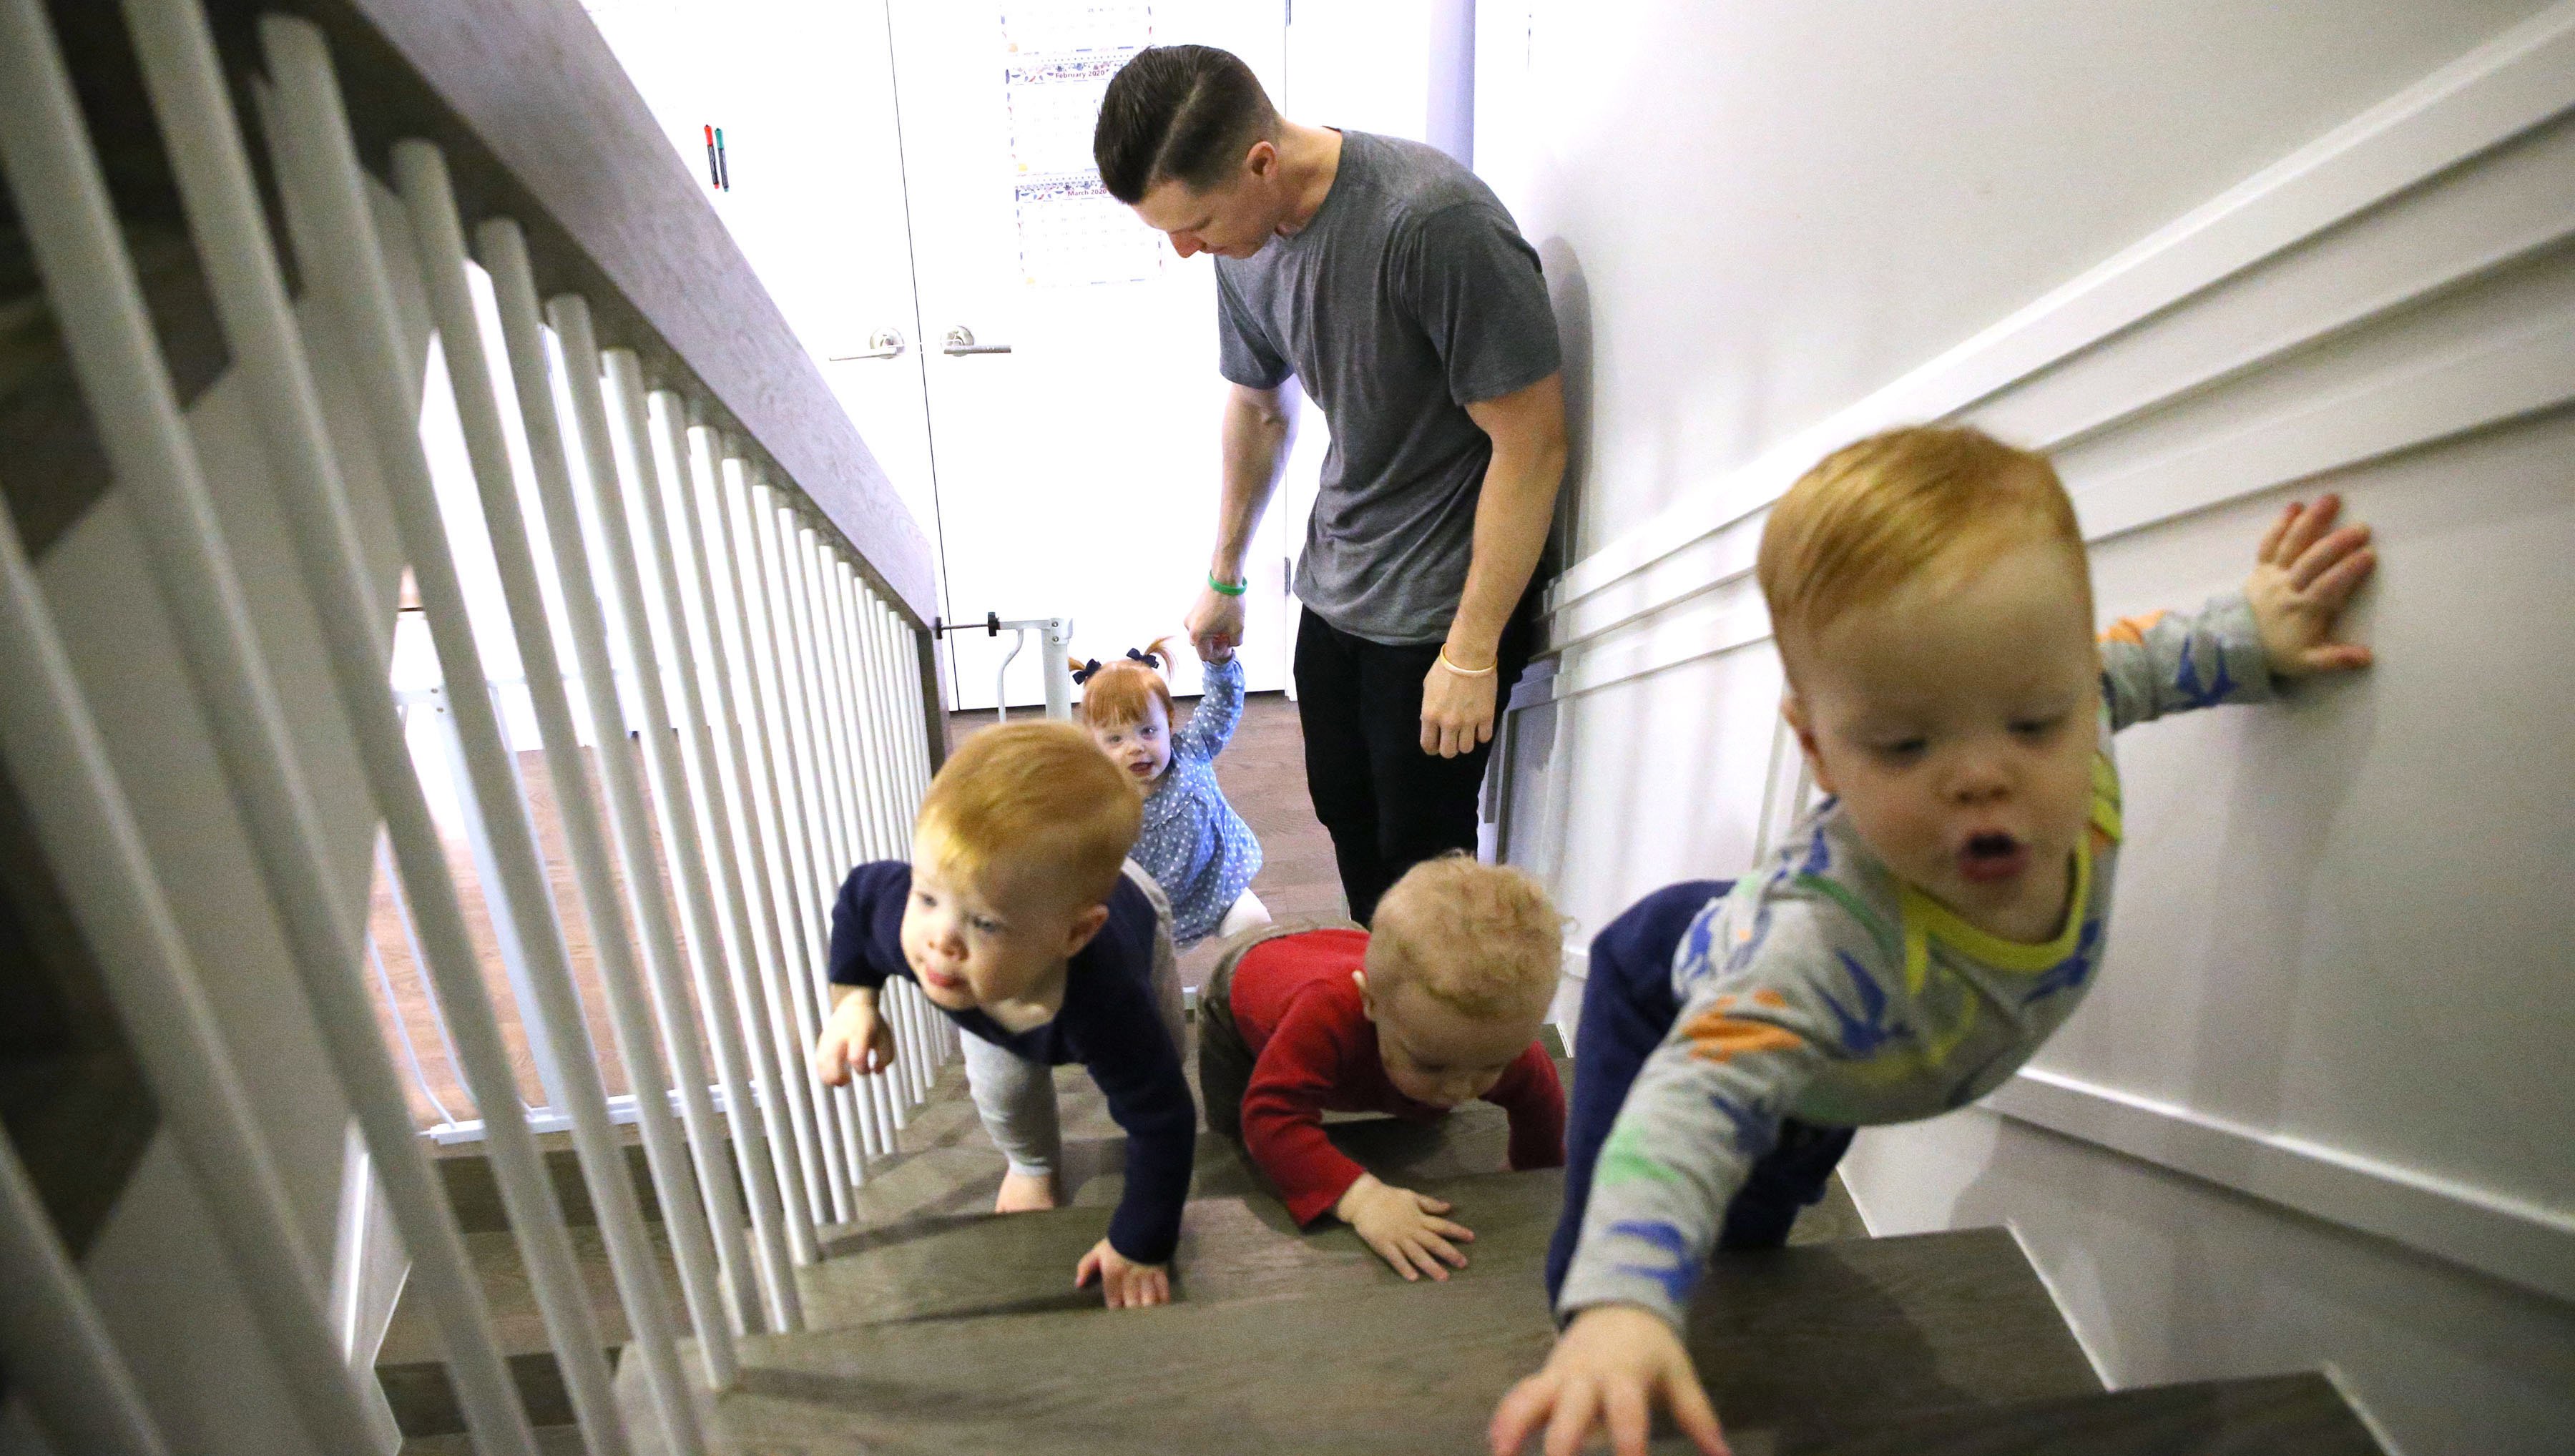 Charlie Whitmer and his children run up the stairs. | Source: Getty Images